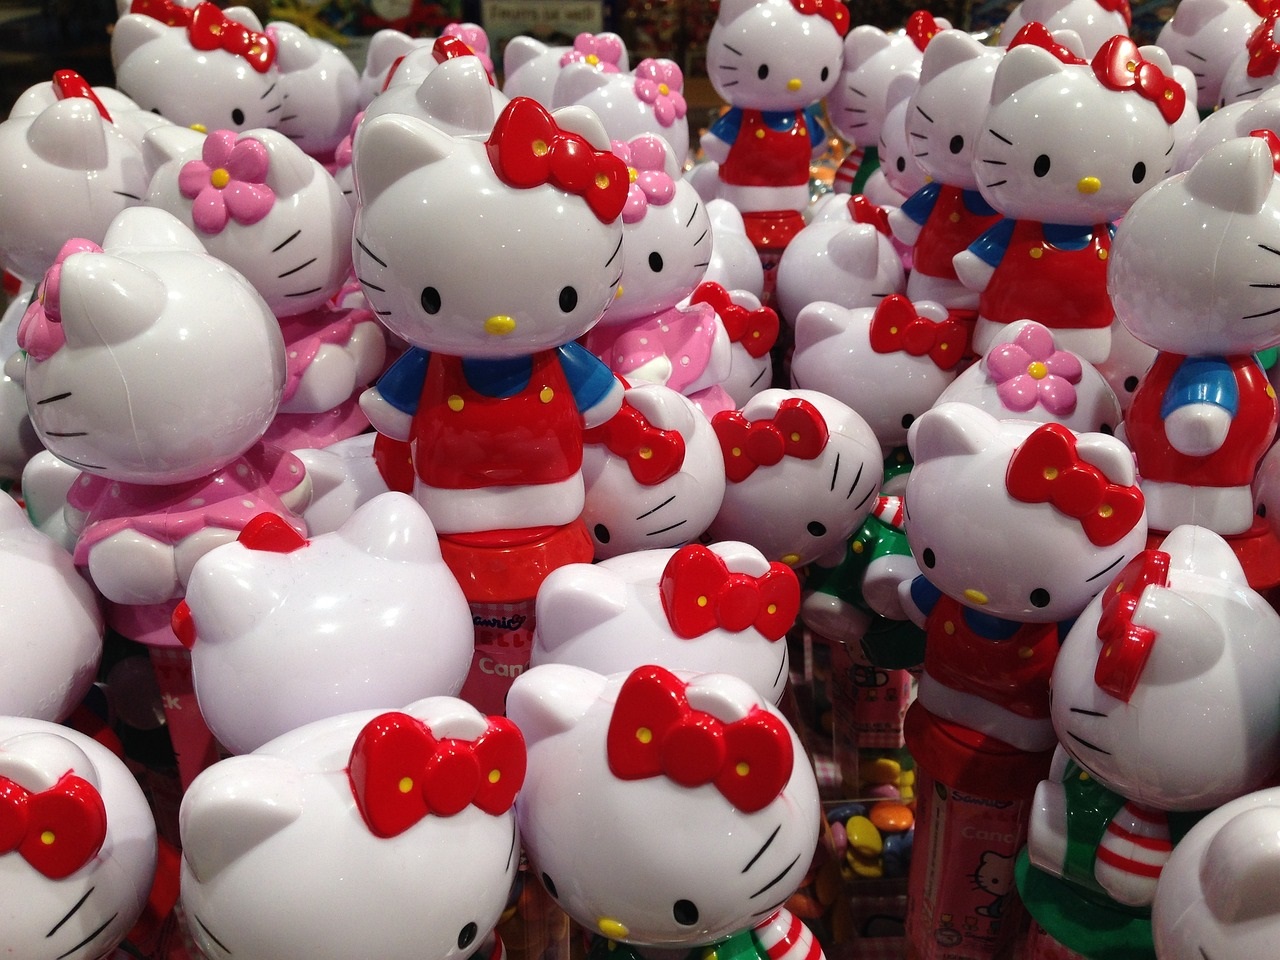 Hello Kitty Merchandise: From Pencils to Airplanes